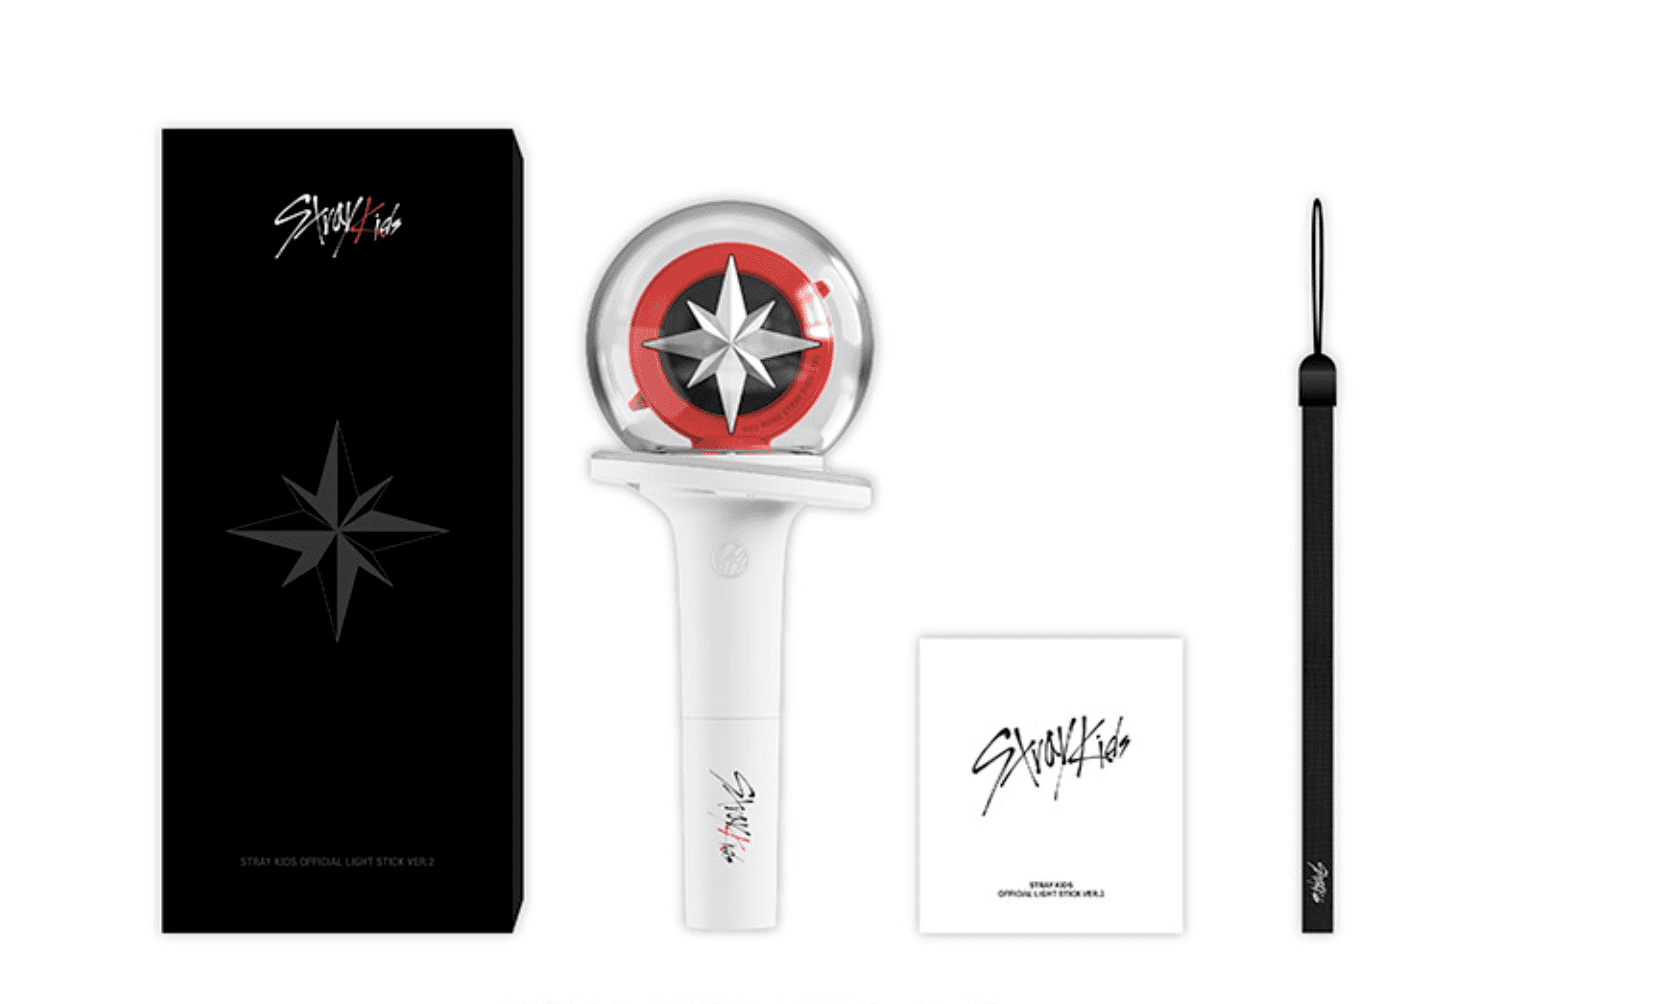 New [STRAY KIDS] Official Light Stick Concert Cheer Stick For [Stray Kids]  Fans